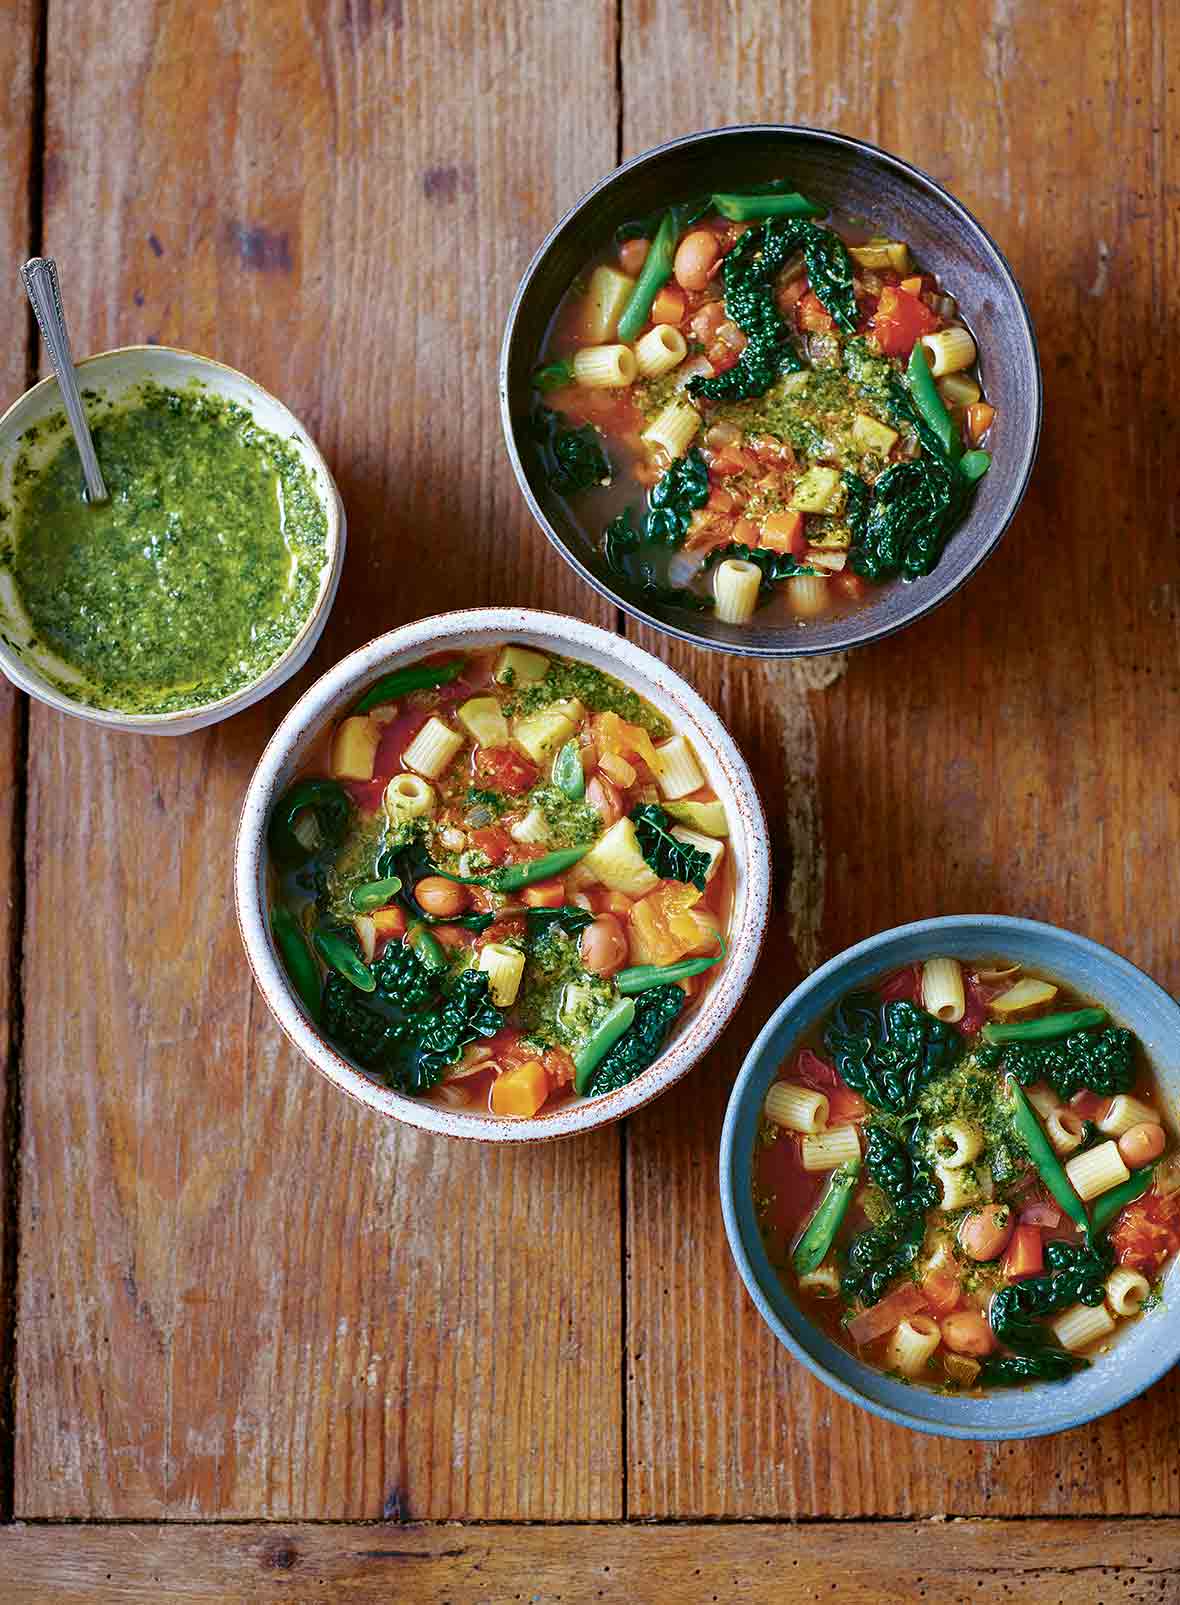 Three bowls of minestrone soup and a small bowl of pesto.